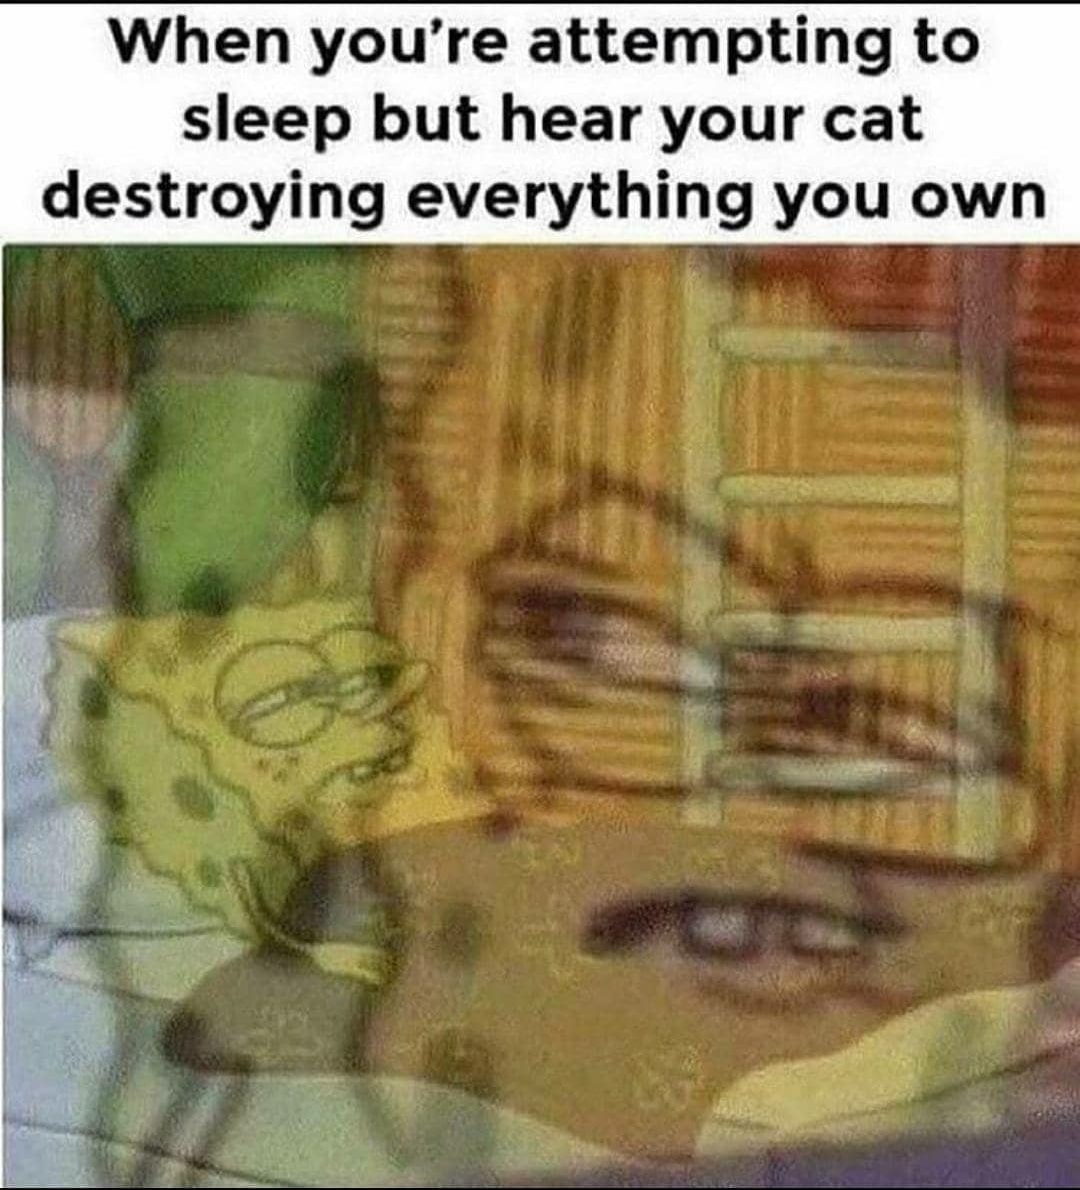 Spongebob, MEOW, MEOW, MEOW Spongebob Memes Spongebob, MEOW, MEOW, MEOW text: When you're attempting to sleep but hear your cat destroying everything you own 